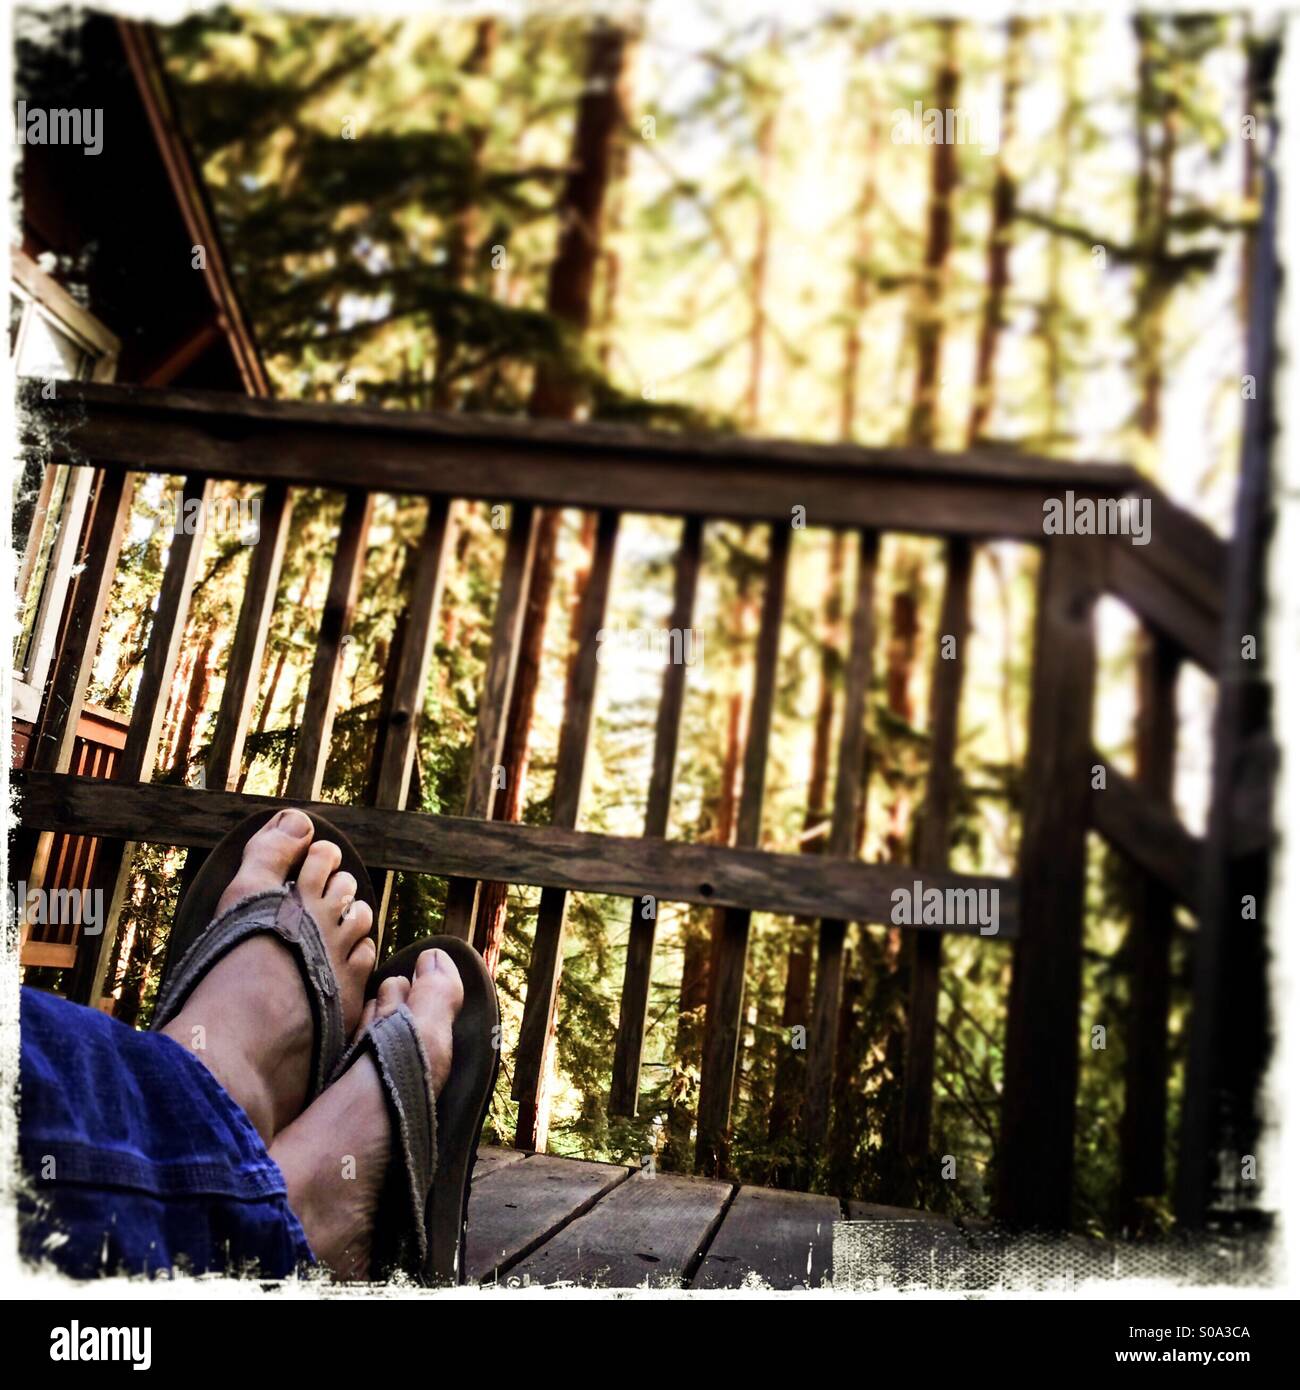 A man's feet crossed while sitting on a deck in a forest. Stock Photo